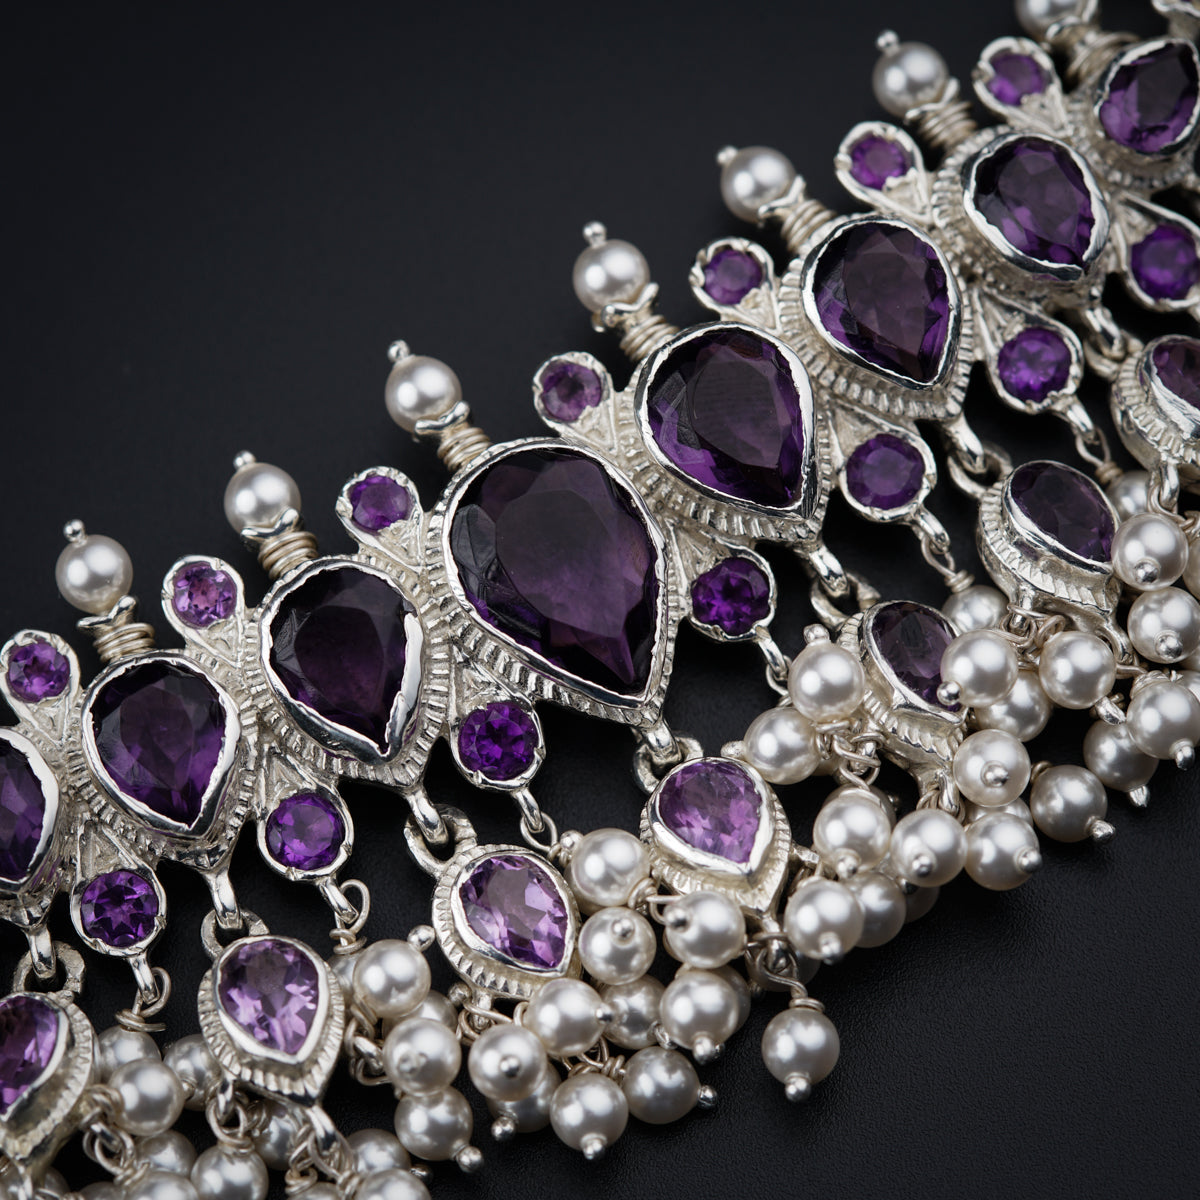 a close up of a bracelet with pearls and amethyst